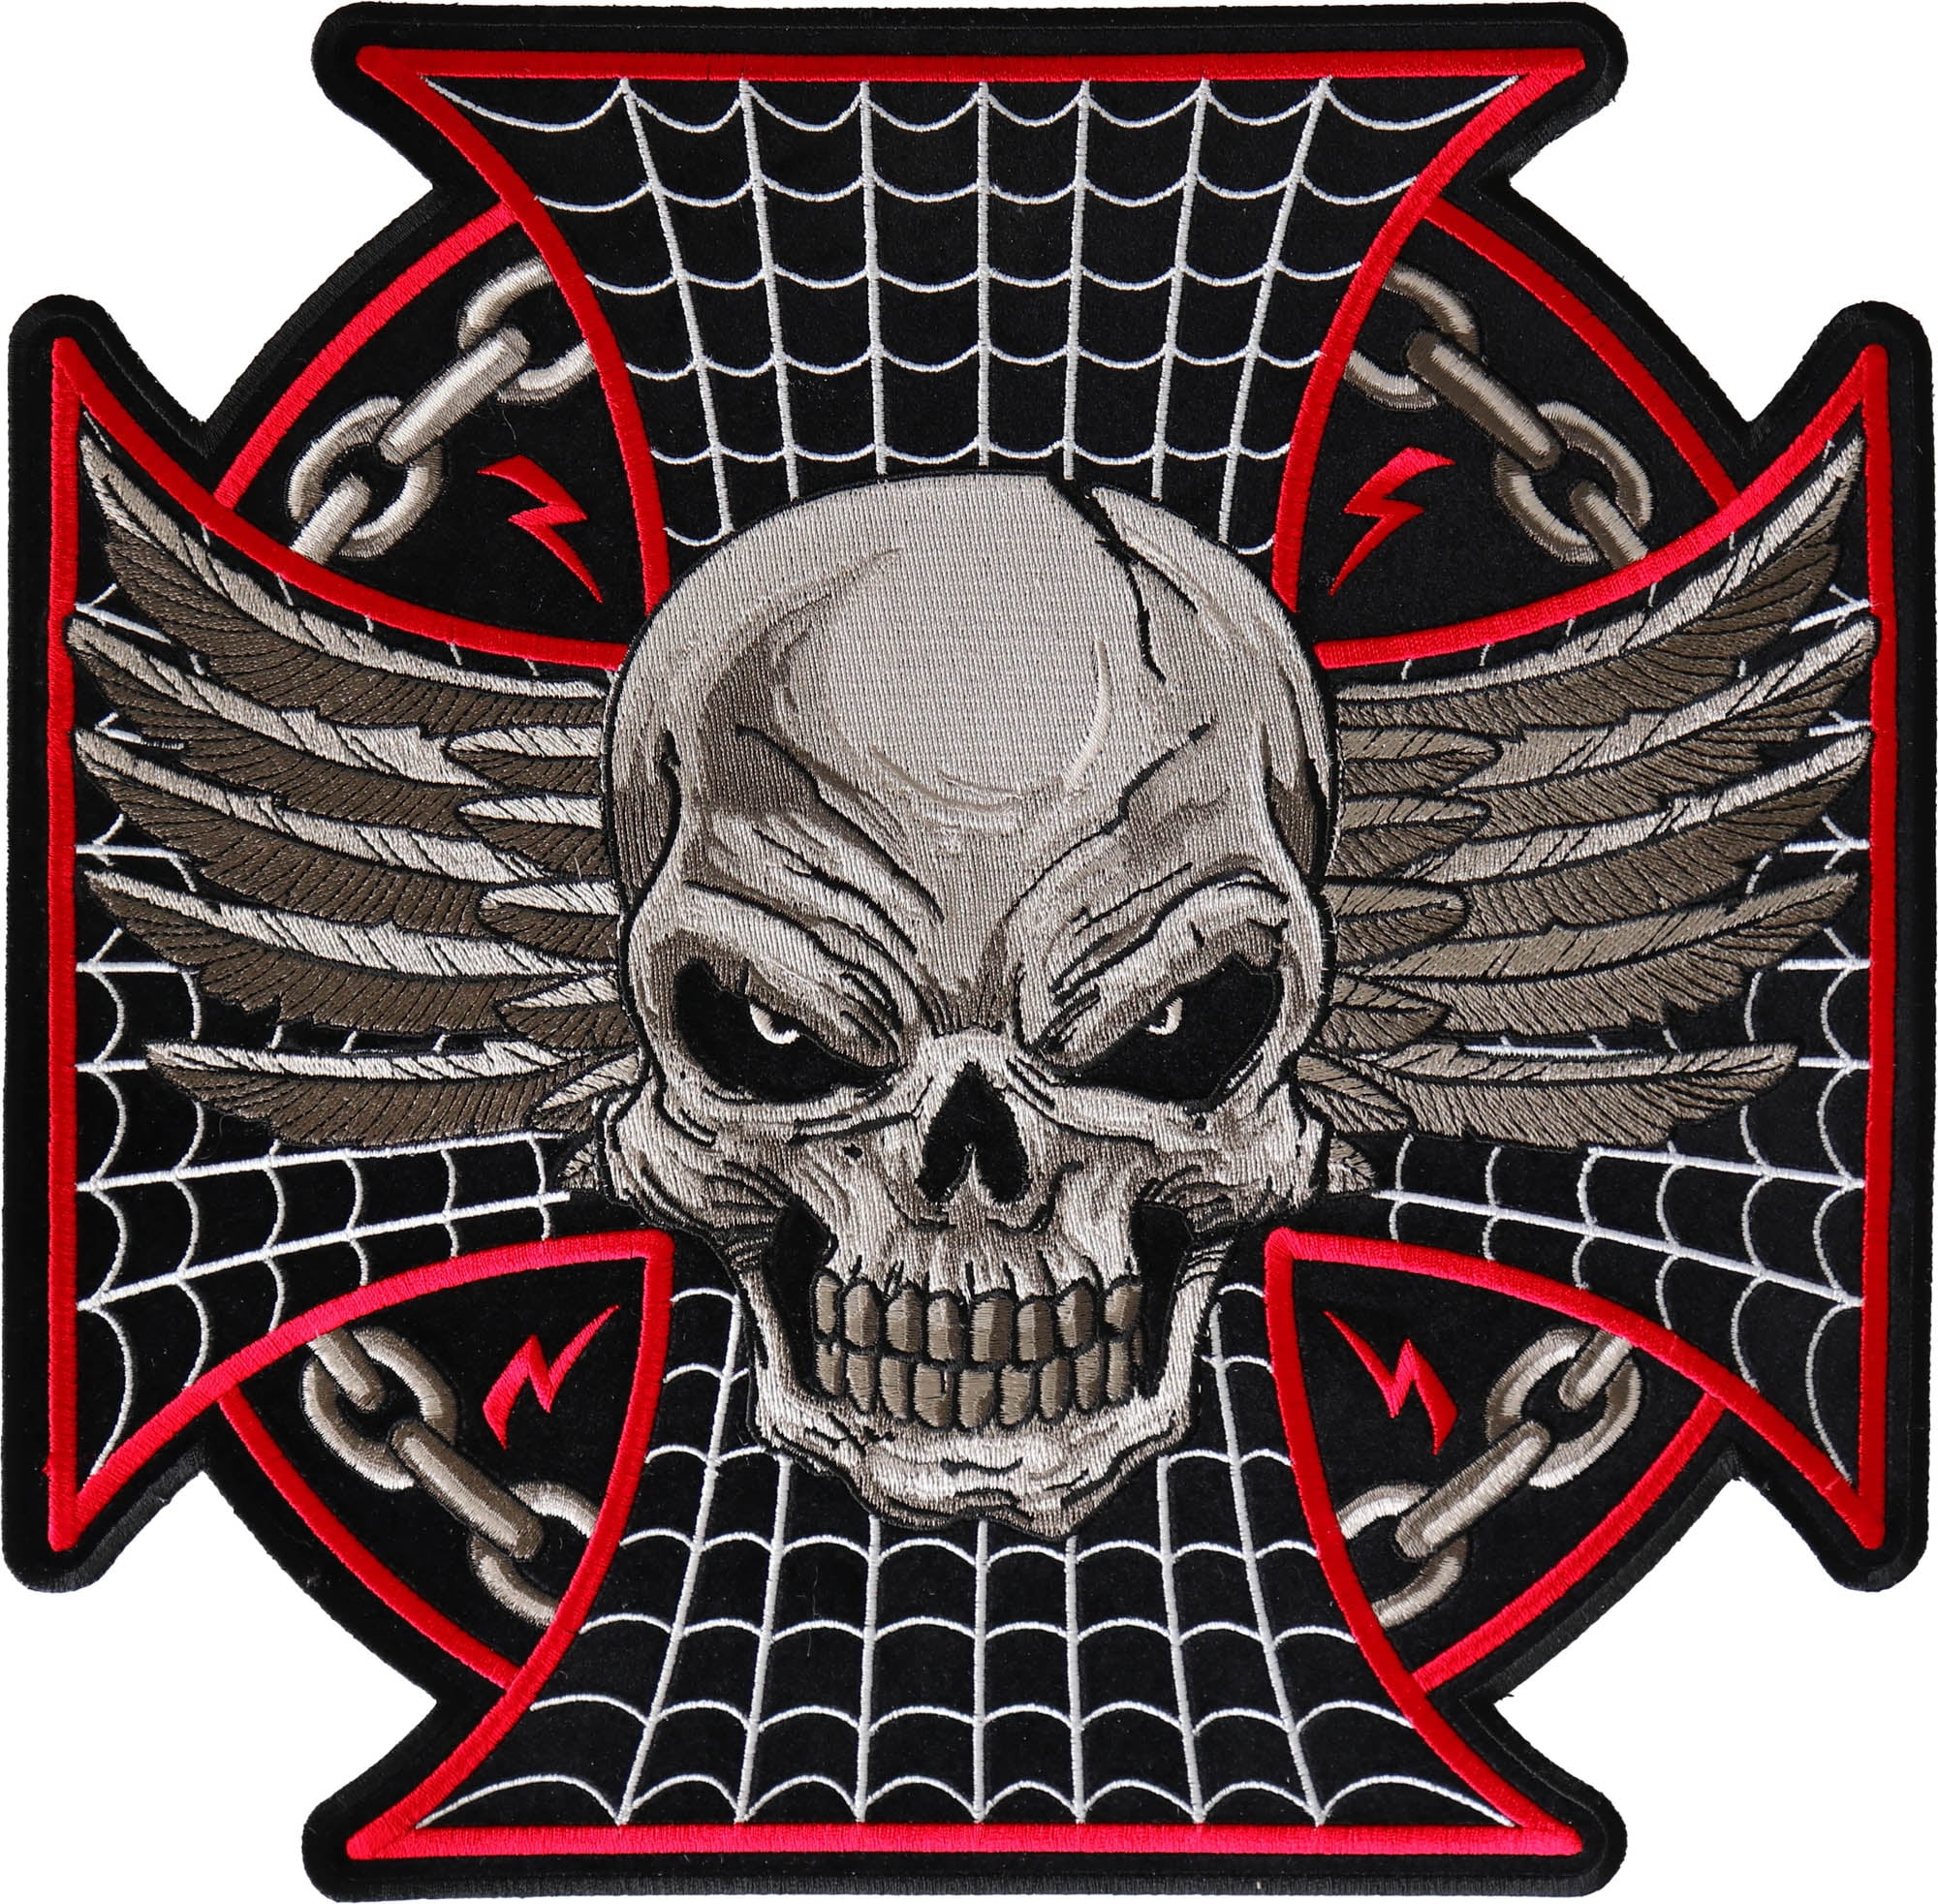 Biker Skull Patch, Large Back Patches for Jackets and Vests 